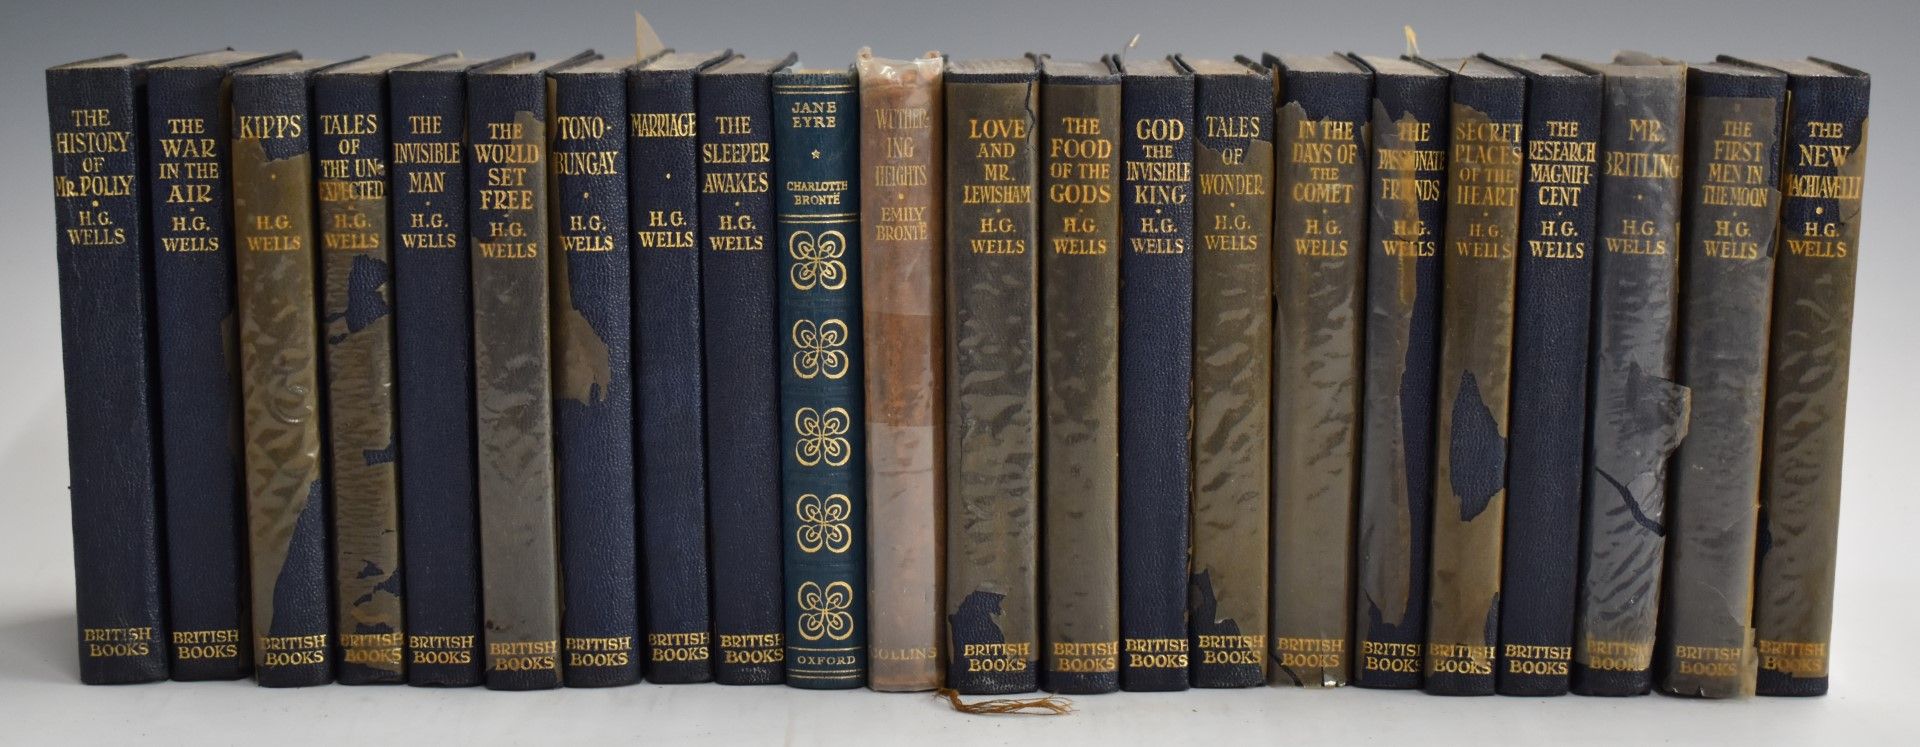 H.G. Wells a collection of 20 volumes including The Invisible Man, First Men in the Moon, The War in